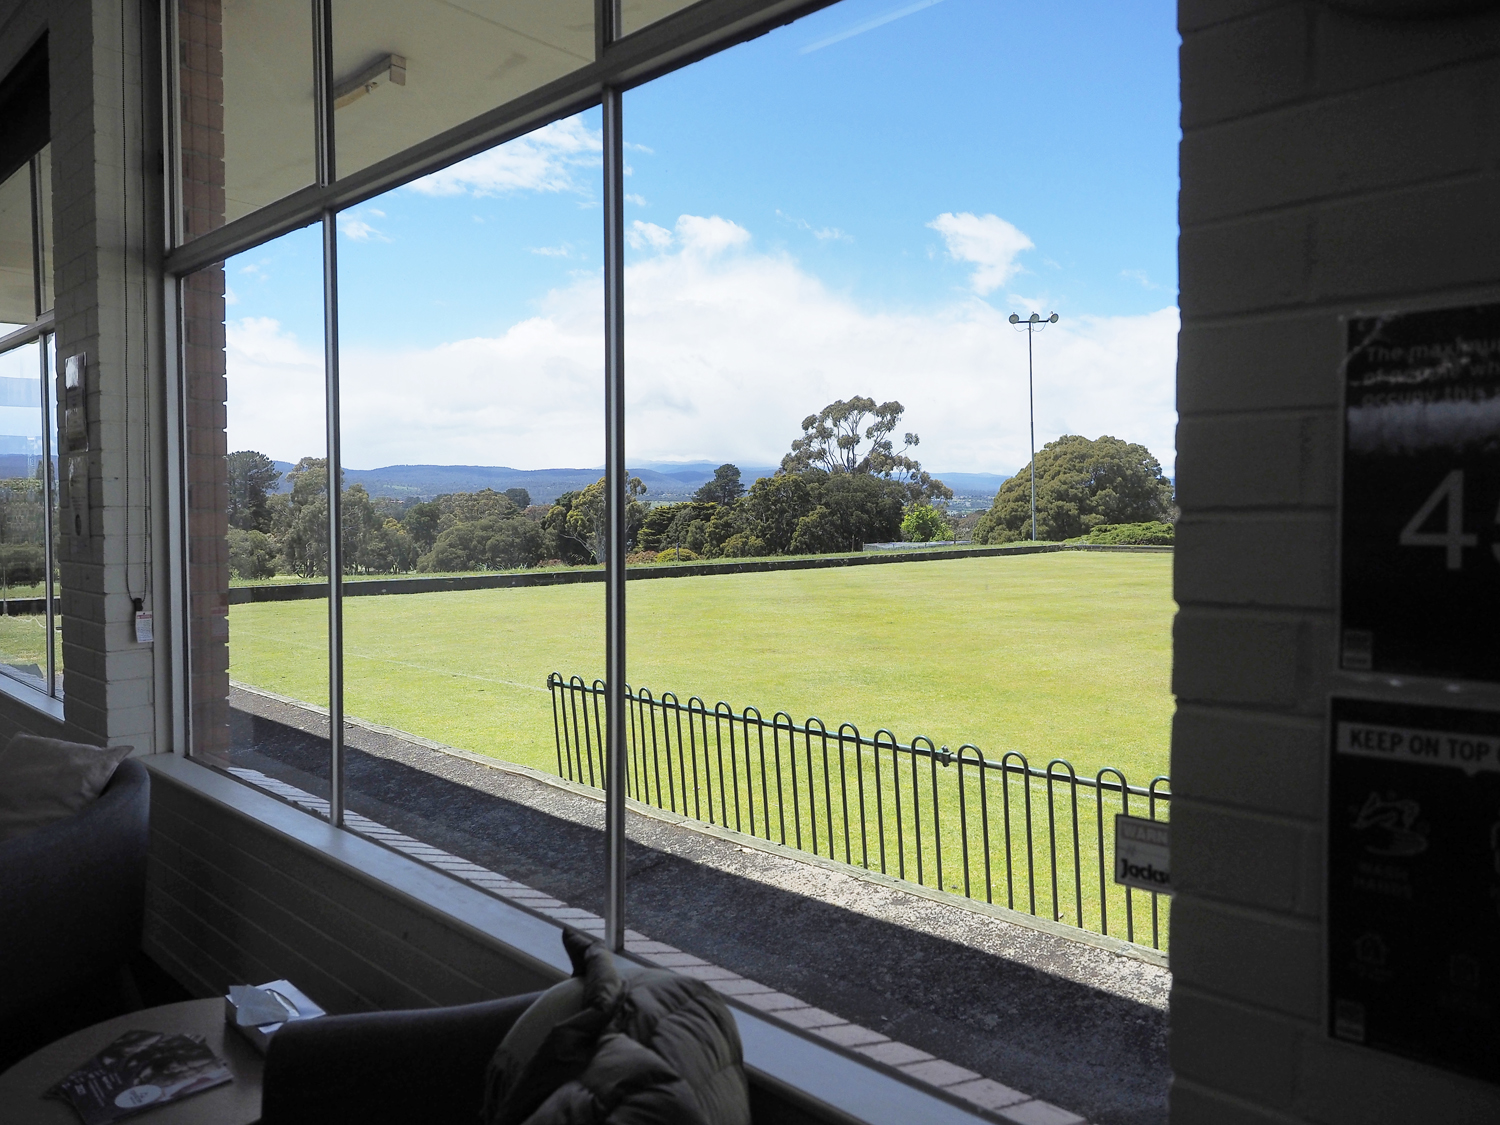 A view looking out a window to a bowls green and trees and hills in the background